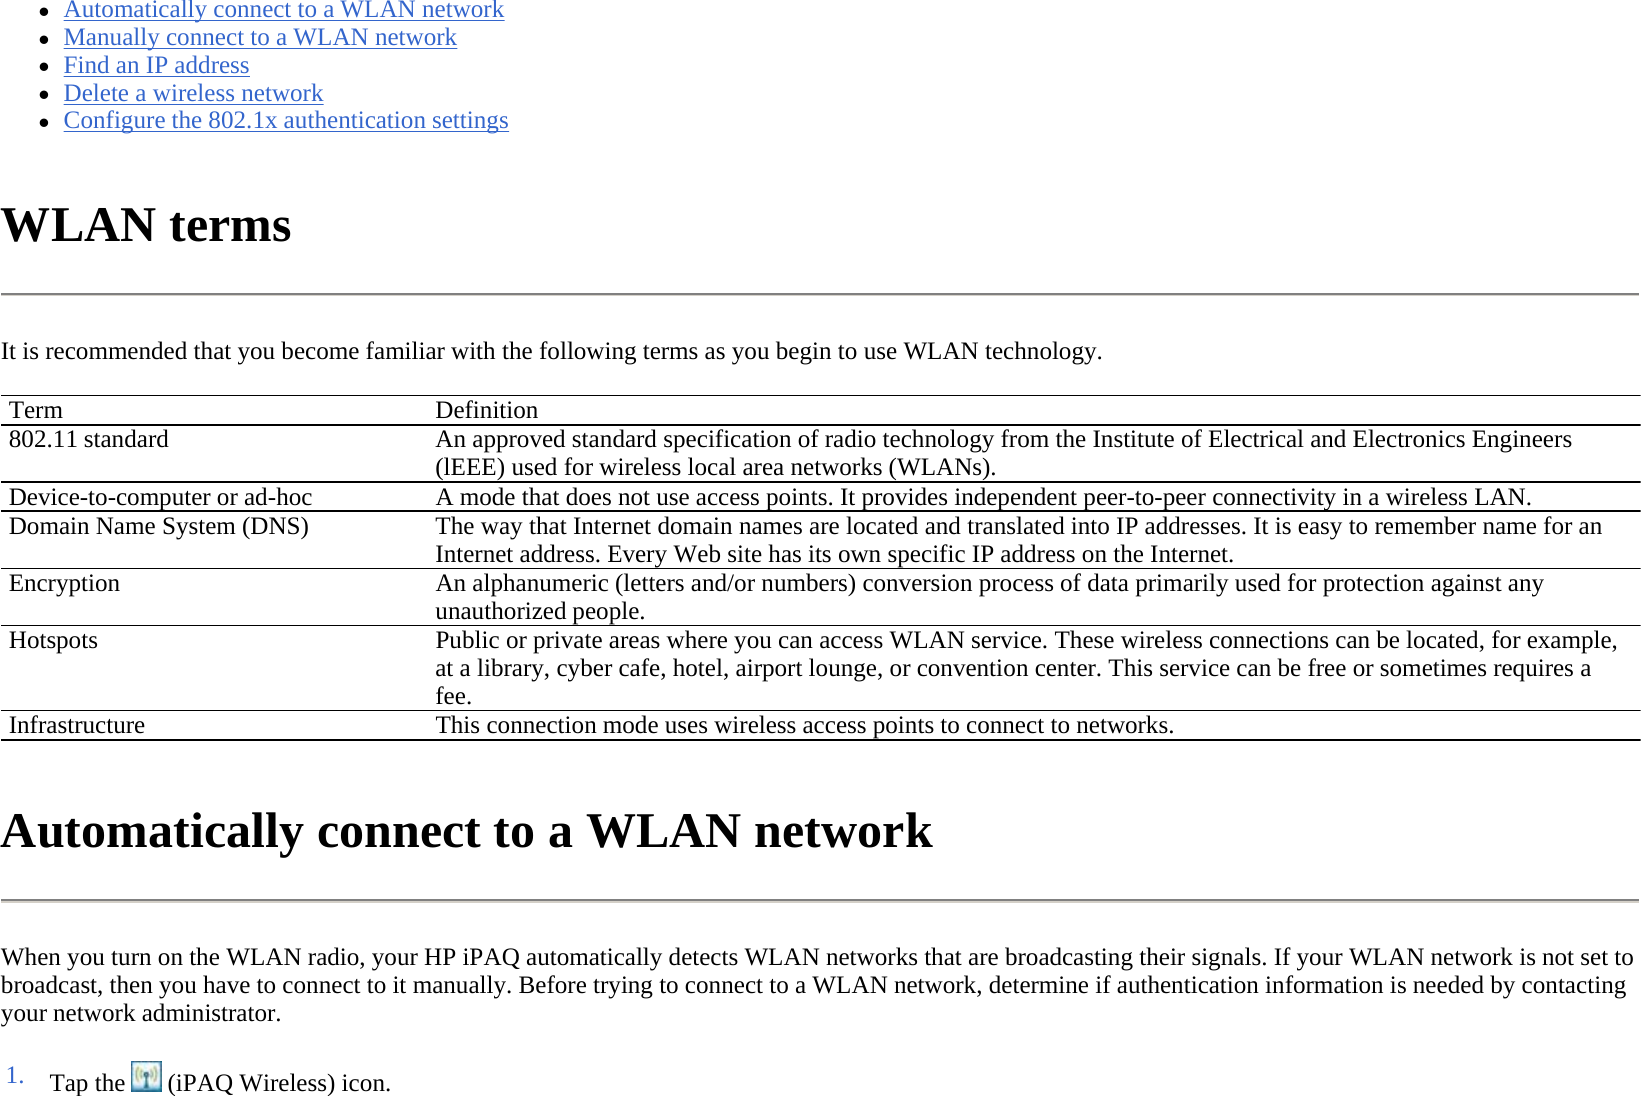 zAutomatically connect to a WLAN network  zManually connect to a WLAN network  zFind an IP address  zDelete a wireless network  zConfigure the 802.1x authentication settings  WLAN terms  It is recommended that you become familiar with the following terms as you begin to use WLAN technology.  Automatically connect to a WLAN network  When you turn on the WLAN radio, your HP iPAQ automatically detects WLAN networks that are broadcasting their signals. If your WLAN network is not set to broadcast, then you have to connect to it manually. Before trying to connect to a WLAN network, determine if authentication information is needed by contacting your network administrator.  Term Definition802.11 standard  An approved standard specification of radio technology from the Institute of Electrical and Electronics Engineers (lEEE) used for wireless local area networks (WLANs).Device-to-computer or ad-hoc  A mode that does not use access points. It provides independent peer-to-peer connectivity in a wireless LAN. Domain Name System (DNS)The way that Internet domain names are located and translated into IP addresses. It is easy to remember name for an Internet address. Every Web site has its own specific IP address on the Internet.Encryption An alphanumeric (letters and/or numbers) conversion process of data primarily used for protection against any unauthorized people.Hotspots  Public or private areas where you can access WLAN service. These wireless connections can be located, for example, at a library, cyber cafe, hotel, airport lounge, or convention center. This service can be free or sometimes requires a fee.Infrastructure This connection mode uses wireless access points to connect to networks.1. Tap the   (iPAQ Wireless) icon. 